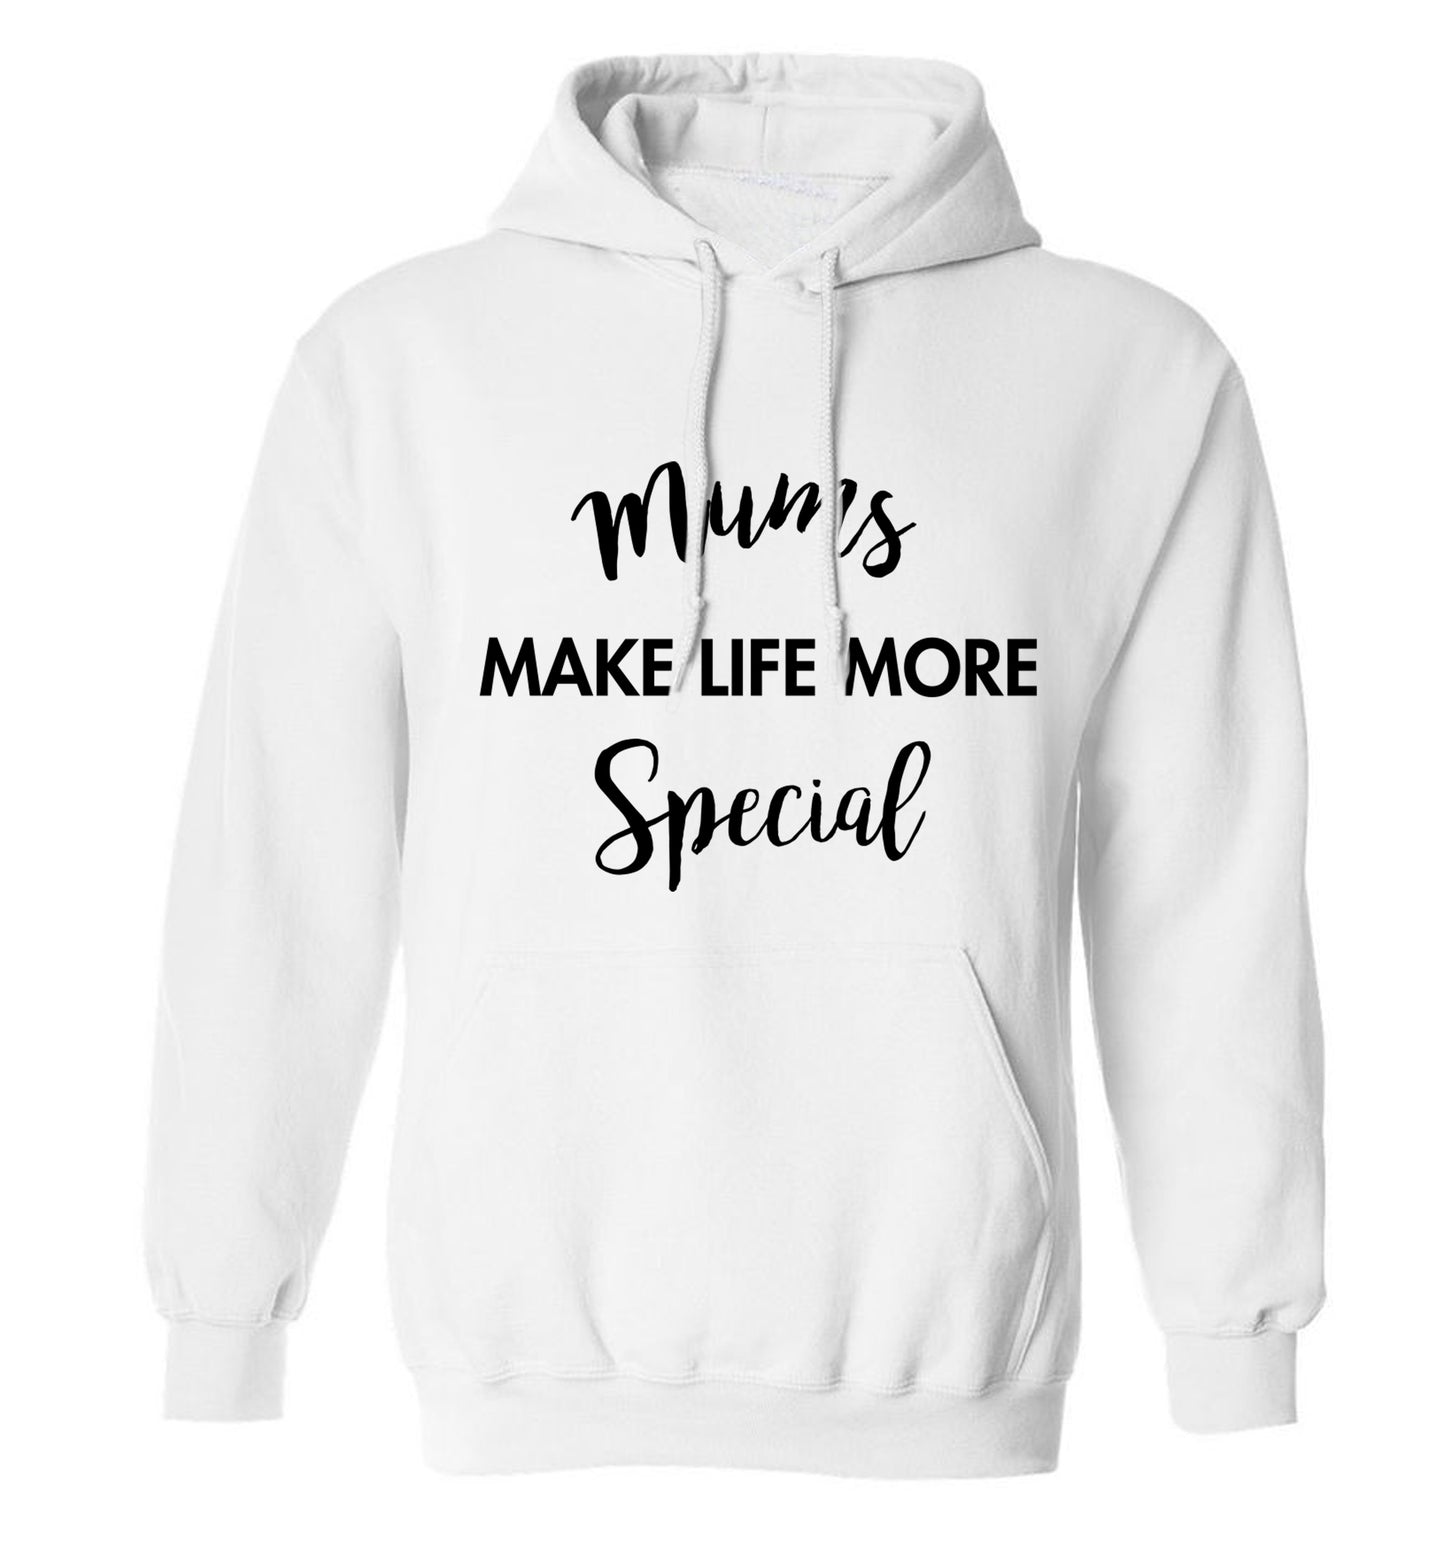 Mum's make life more special adults unisex white hoodie 2XL